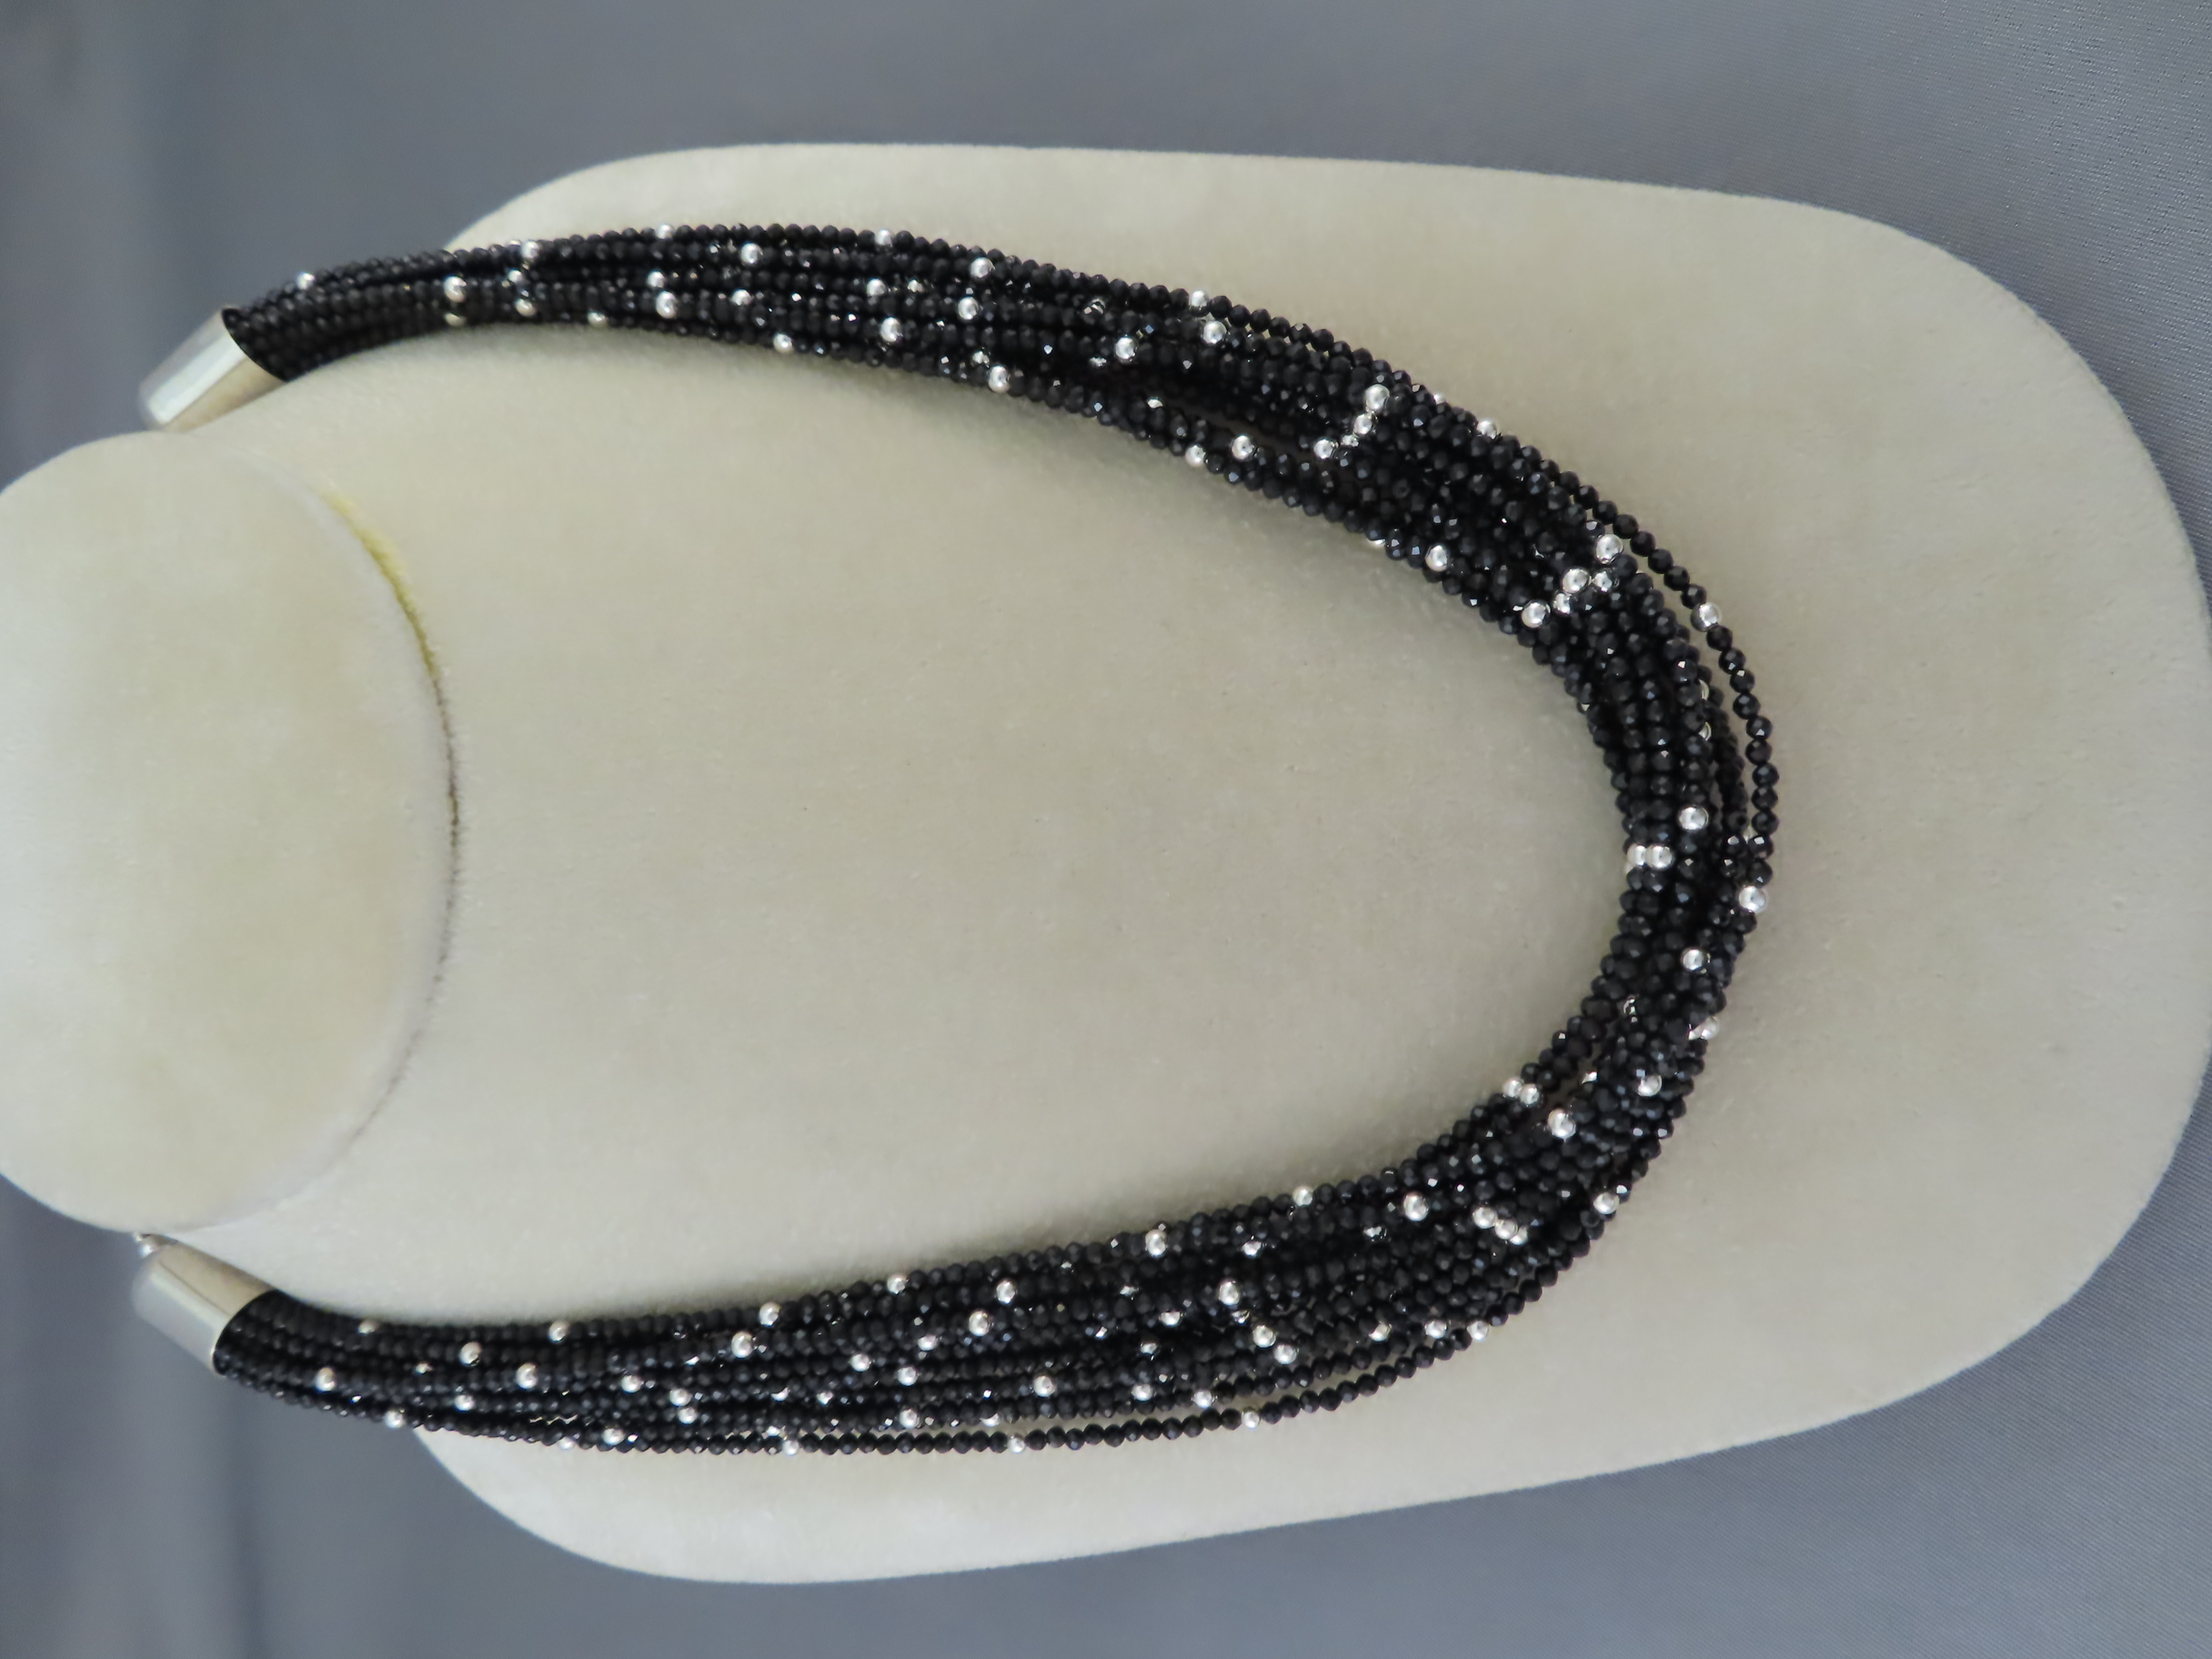 Shop Native American Jewelry - 15Strand Black Spinel Necklace by Navajo jewelers, Desiree & Artie Yellowhorse $785- FOR SALE